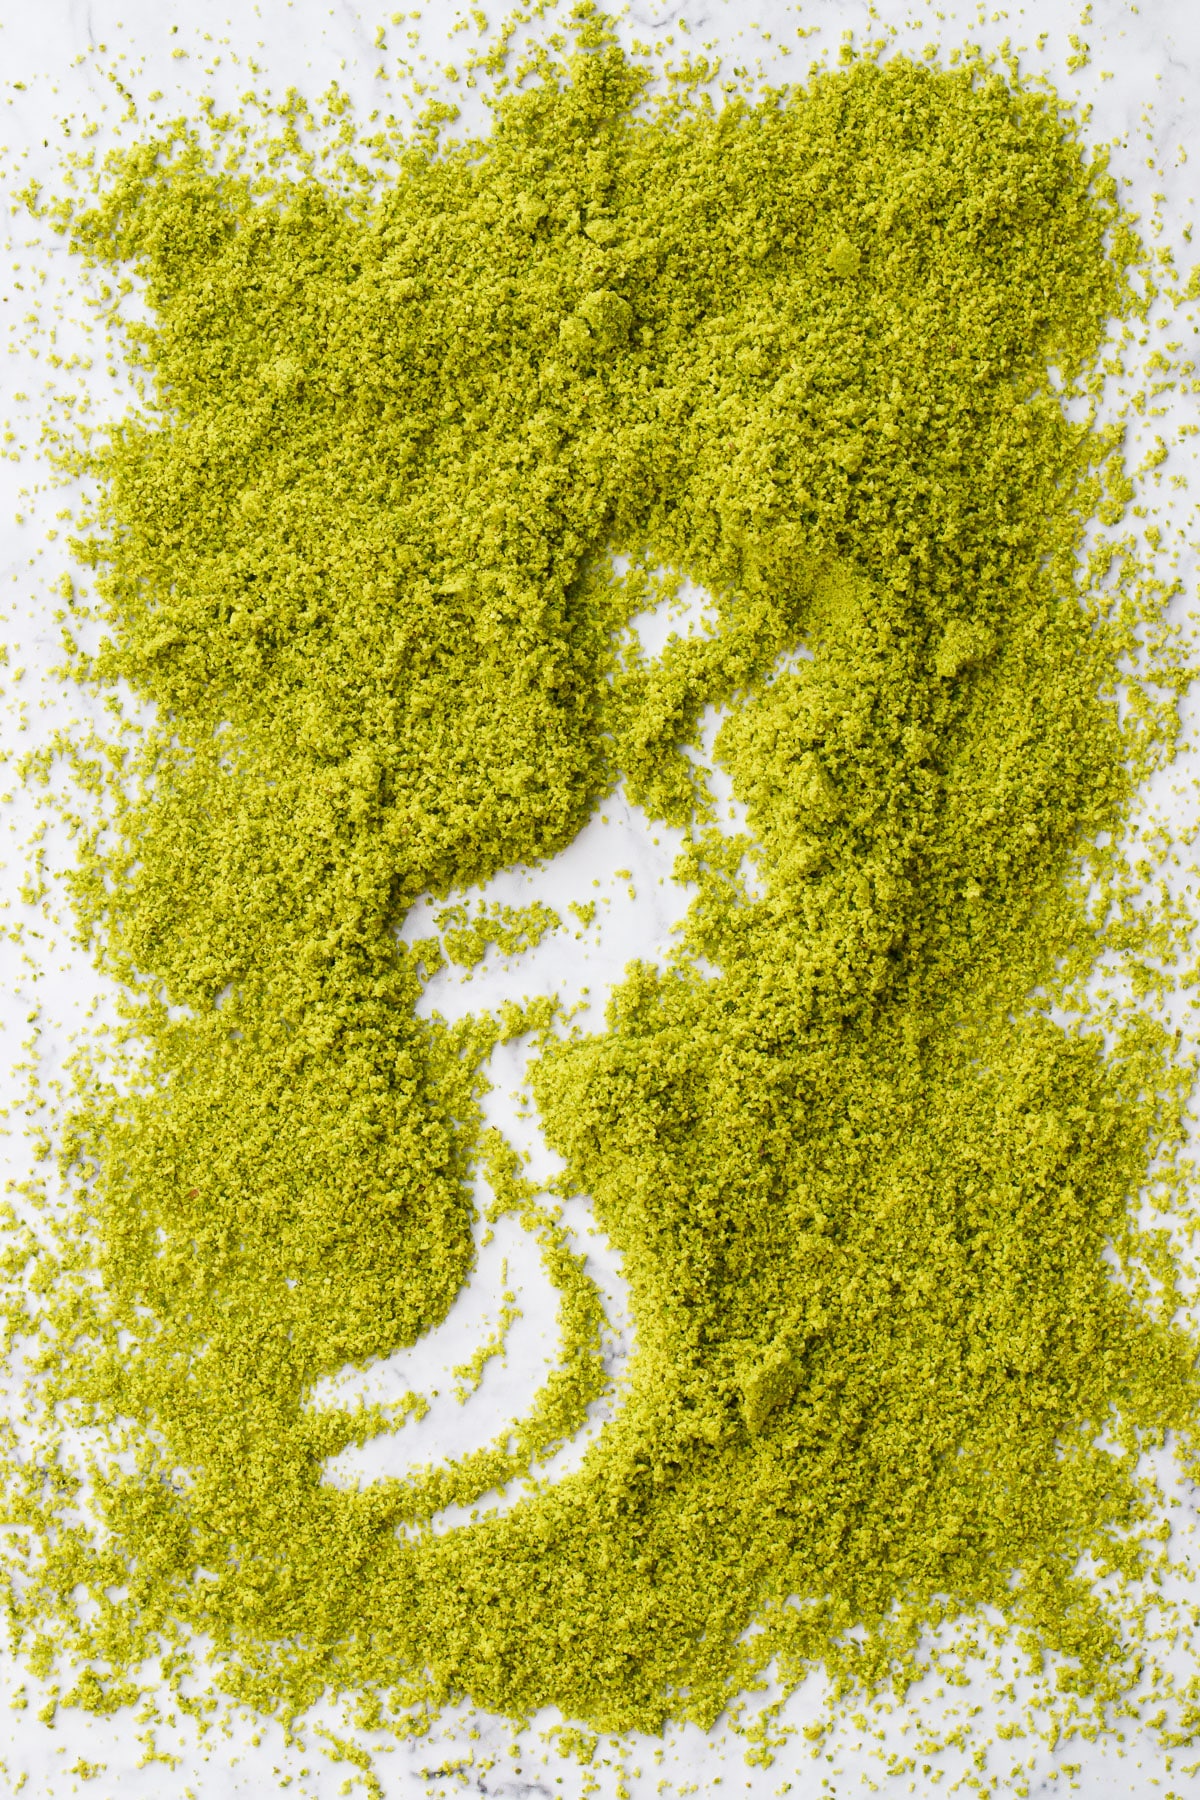 Rough rectangle of homemade pistachio flour with a squiggle dragged through the middle showing the marble background underneath.